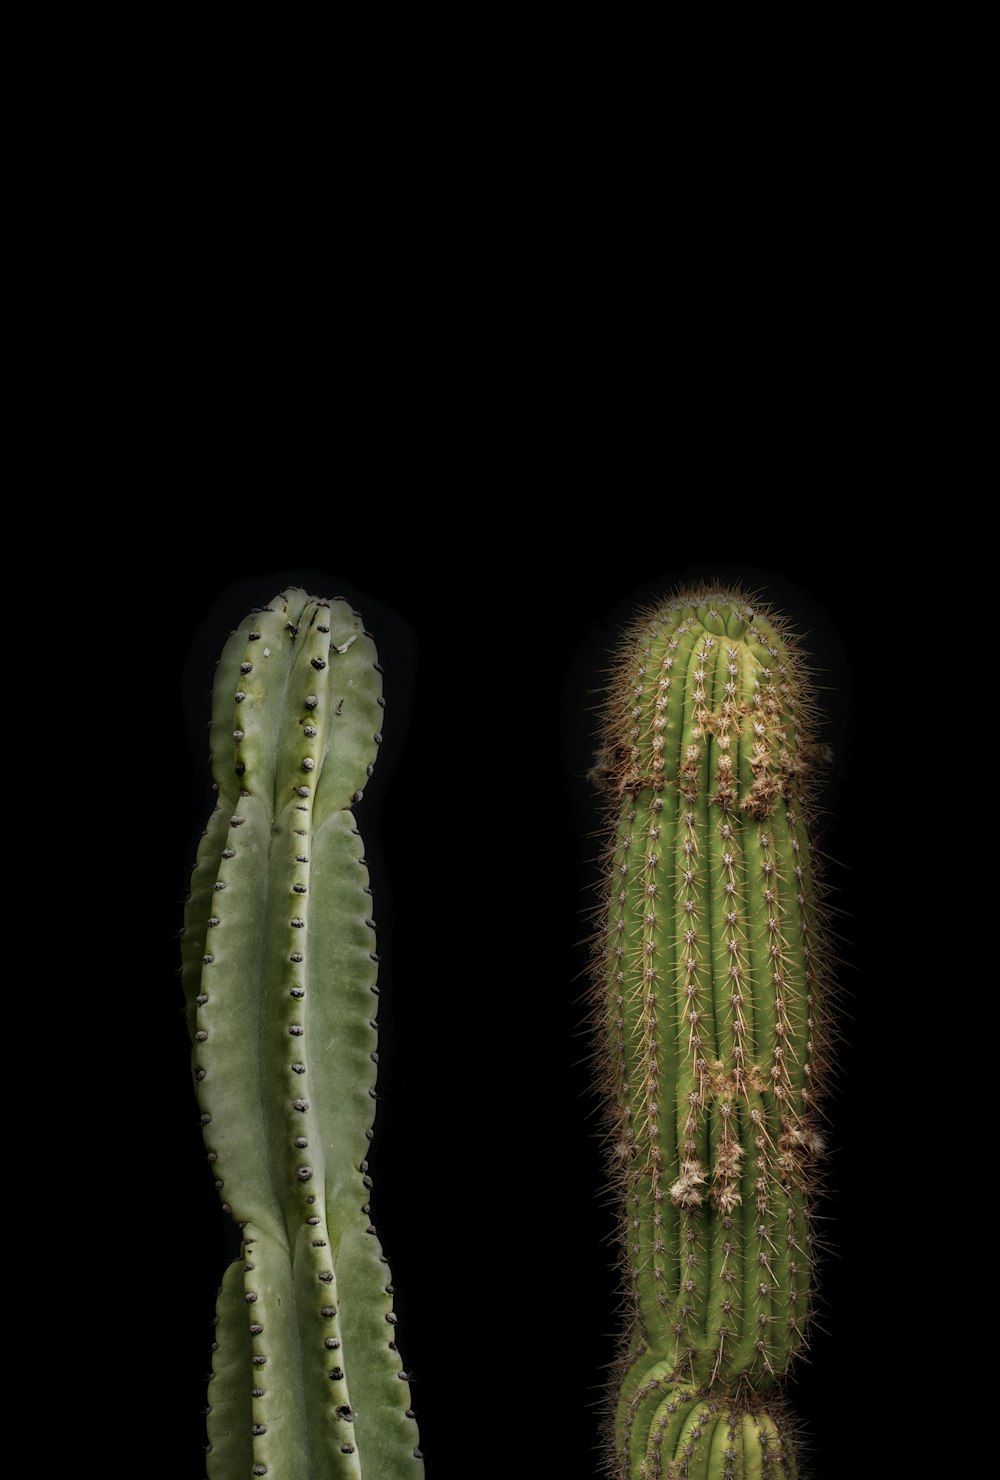 two green cactus plants